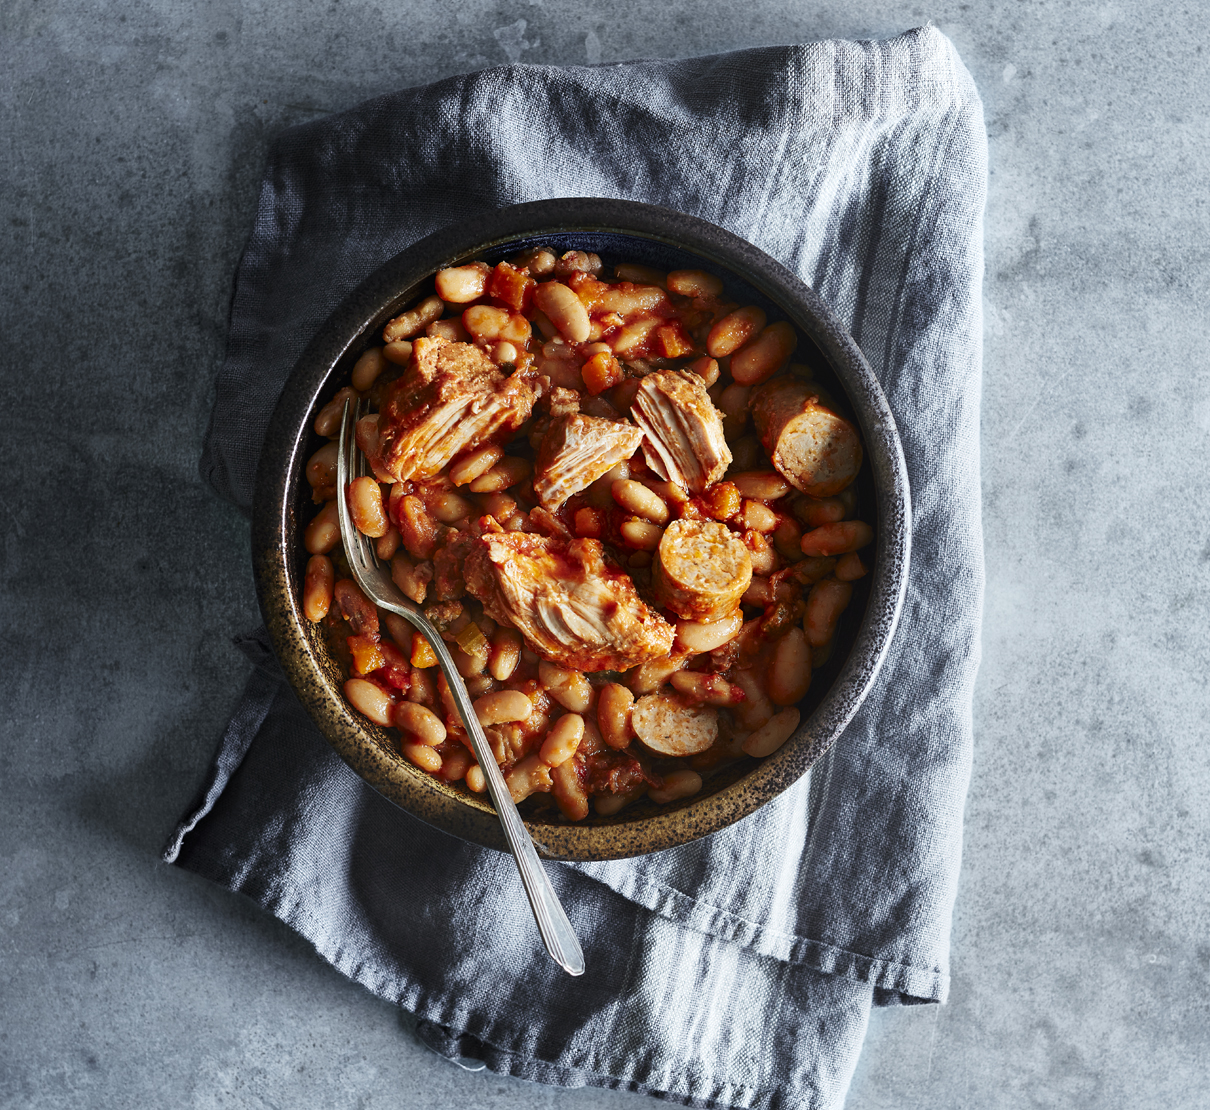 Toulouse-style Cassoulet